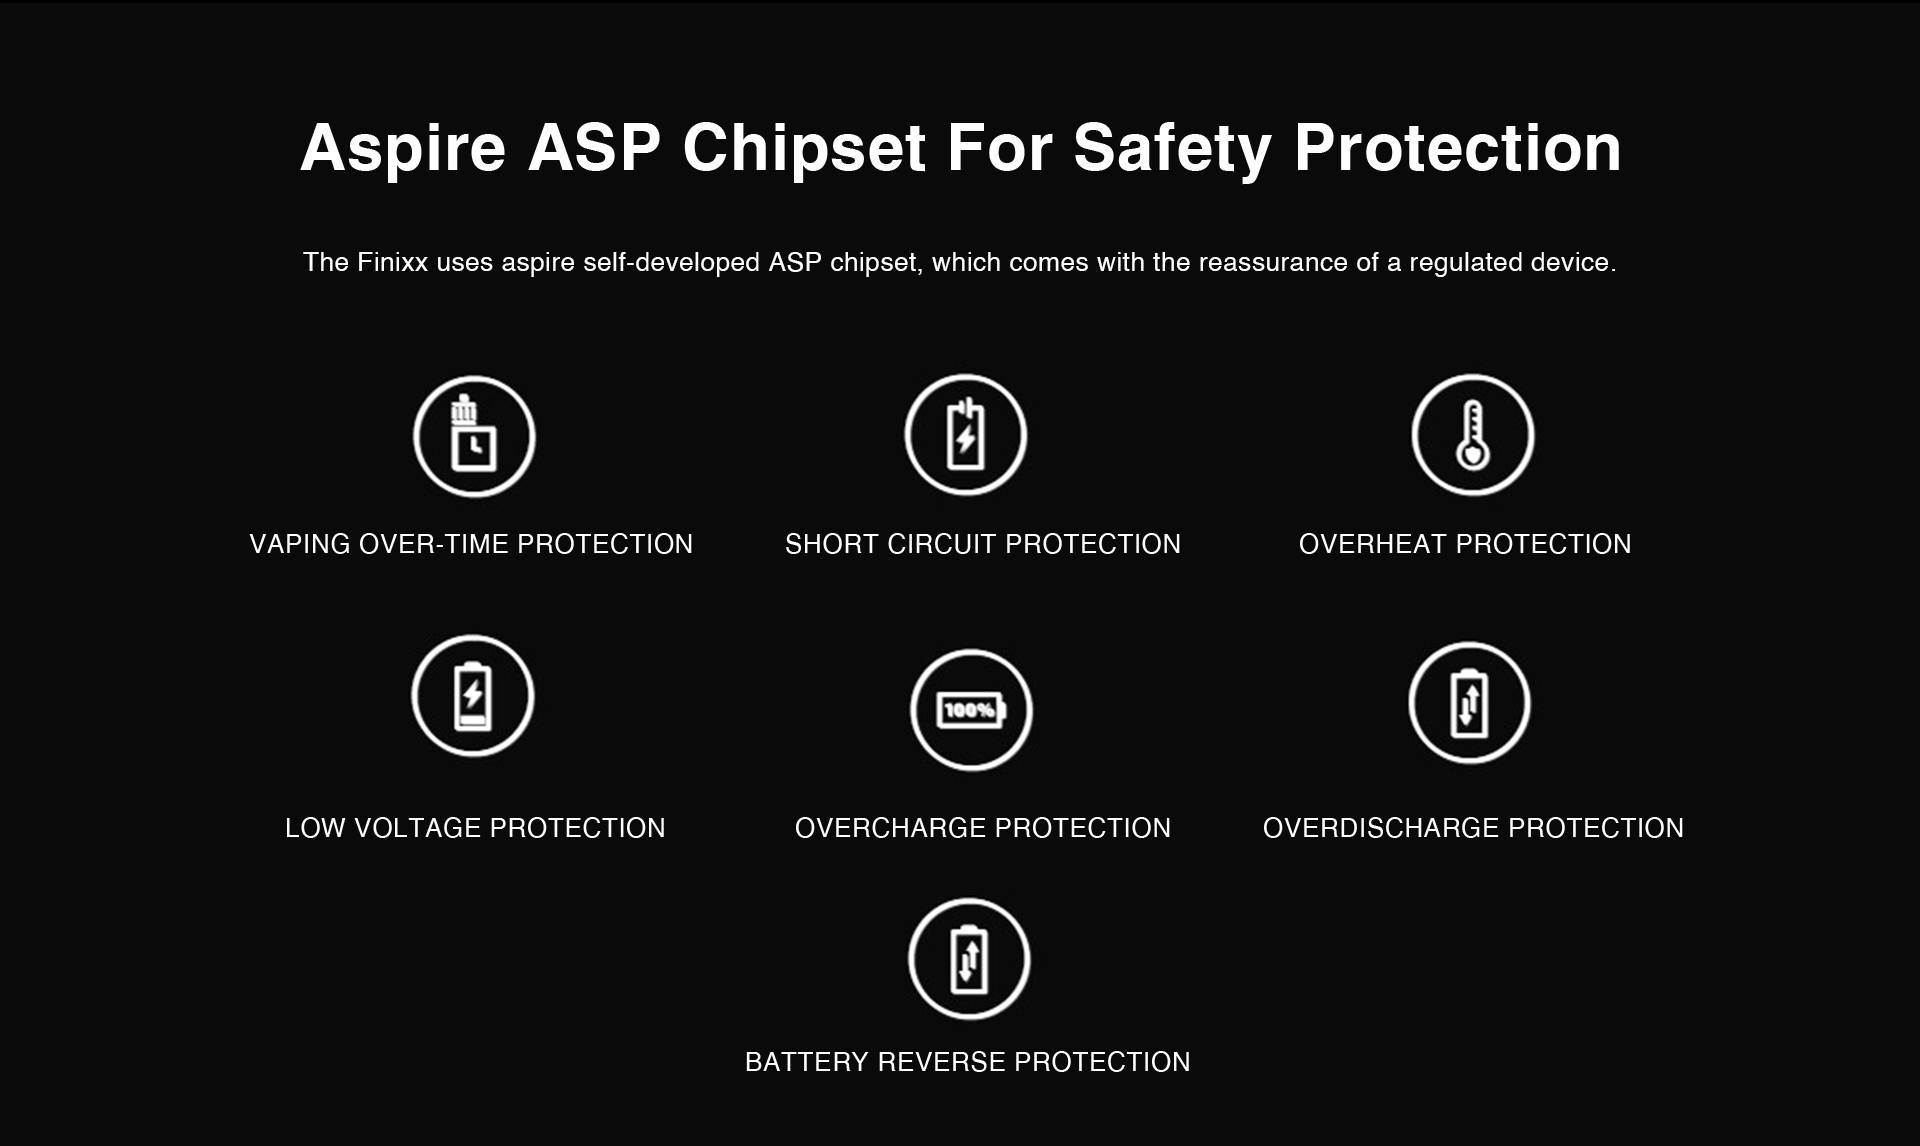 Aspire ASP Chipset For Safety Protection